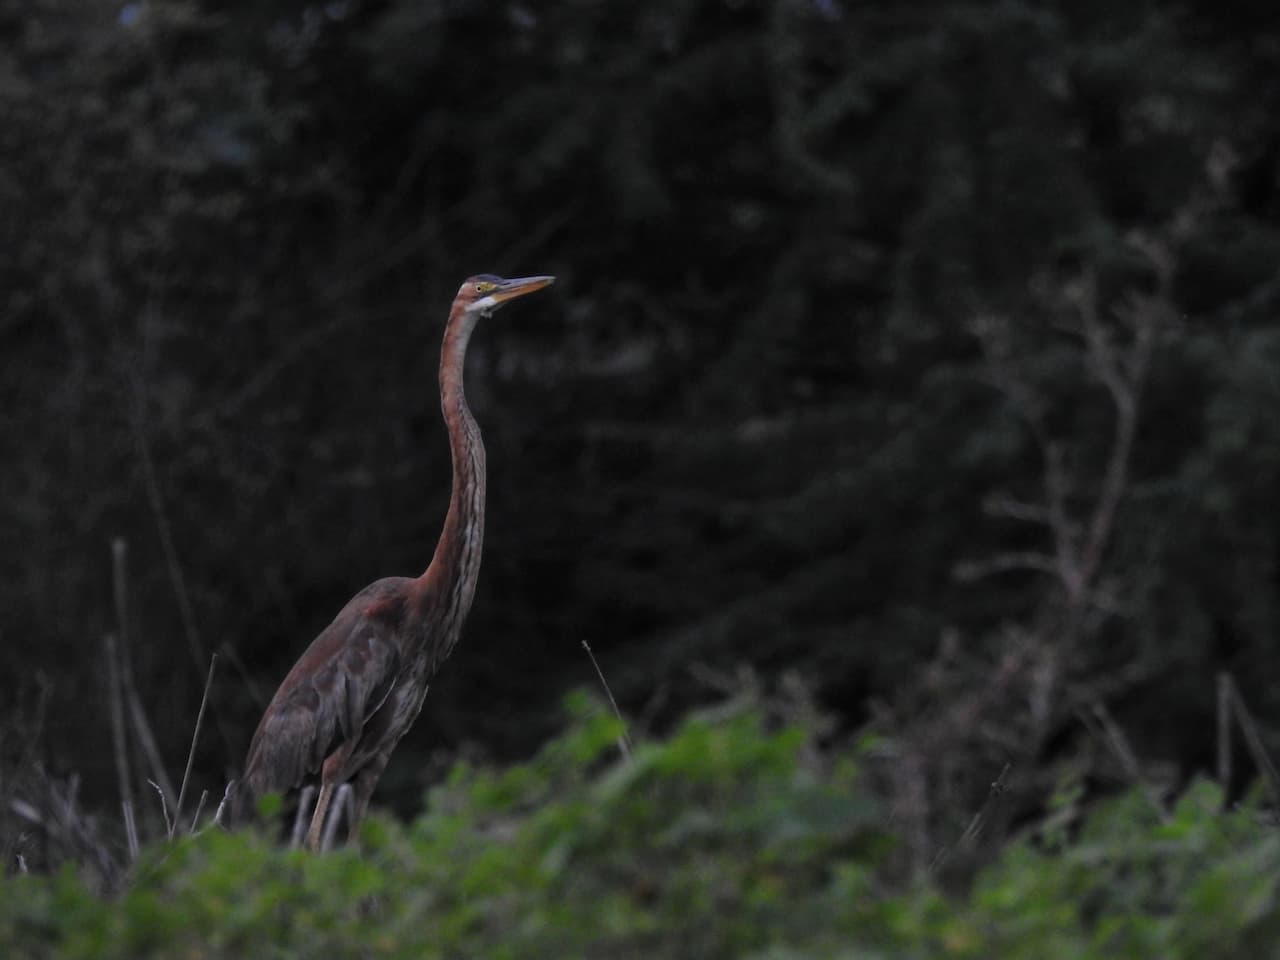 A Purple Heron Stretching Its Neck